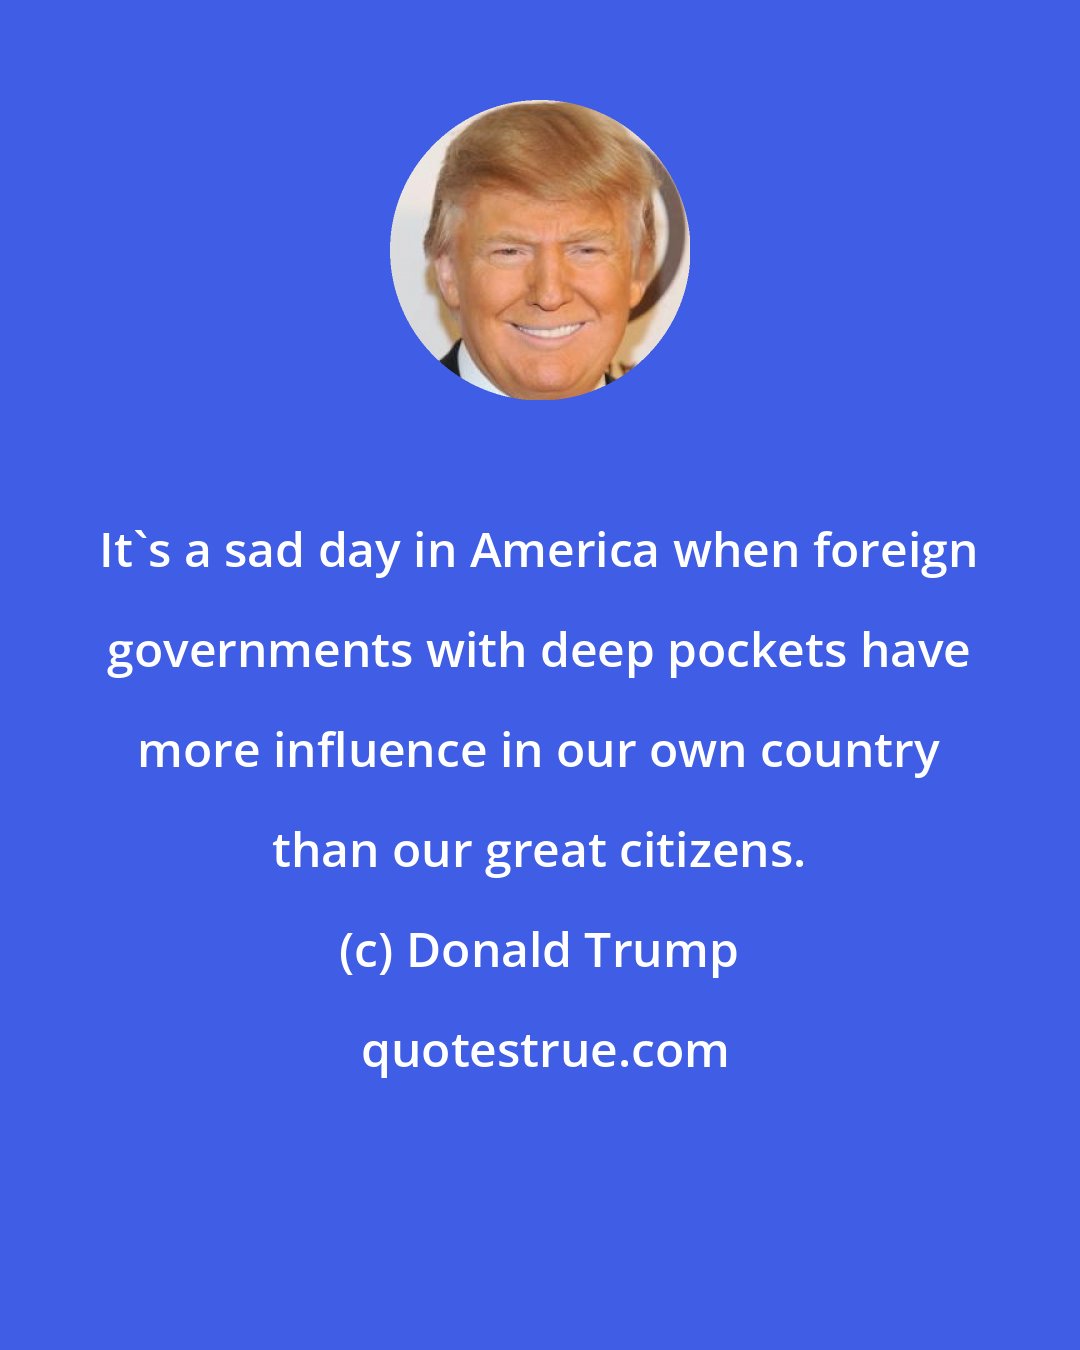 Donald Trump: It's a sad day in America when foreign governments with deep pockets have more influence in our own country than our great citizens.